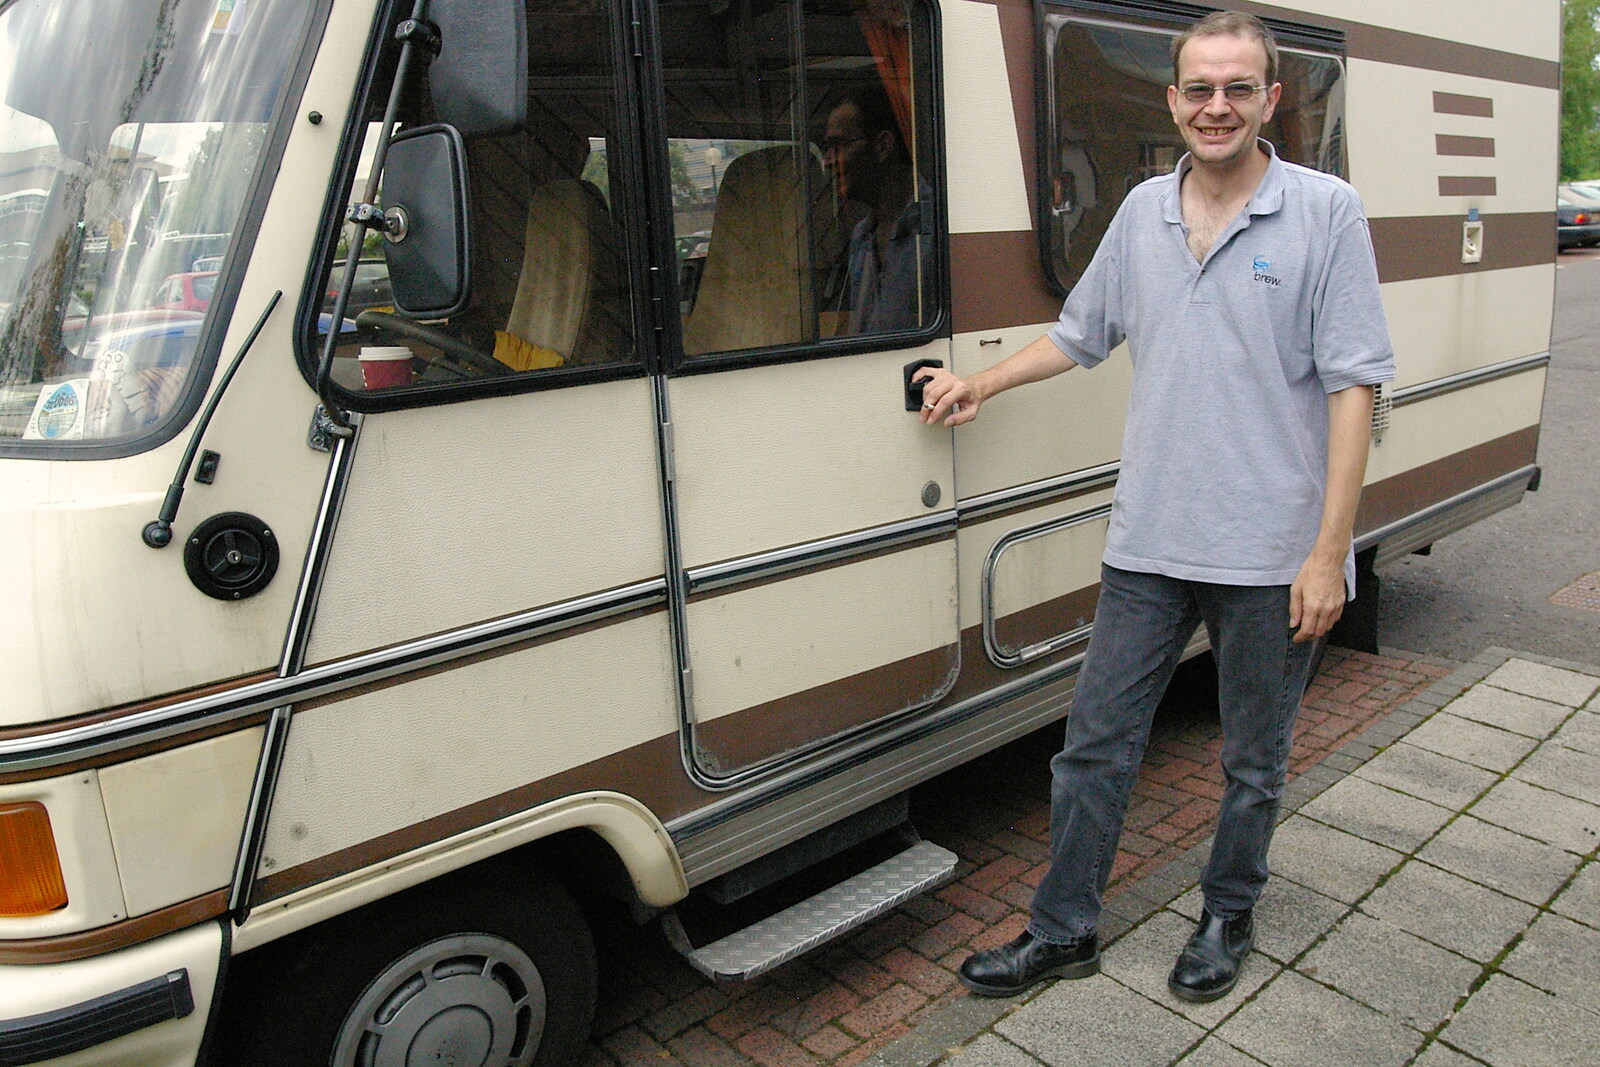 Richard and the van from Richard Panton's Van and Alex Hill at Revolution Records, Diss and Cambridge - 29th July 2005